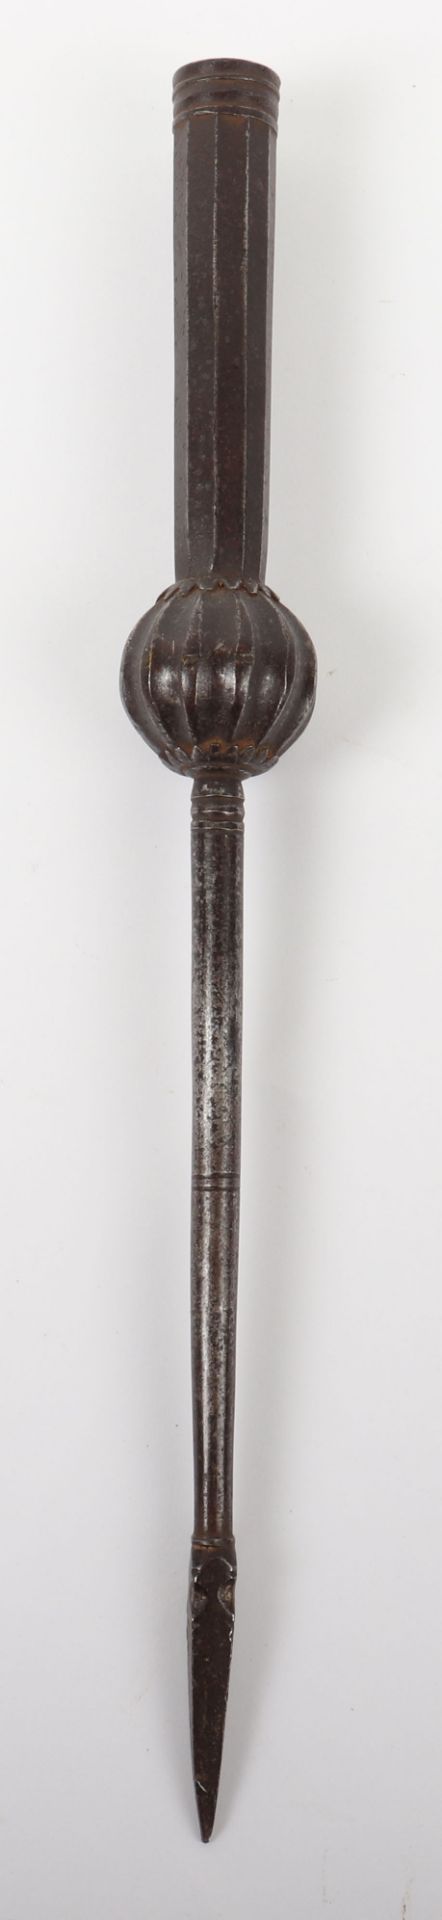 Iron Shoe from an Indian Lance, Probably 18th Century